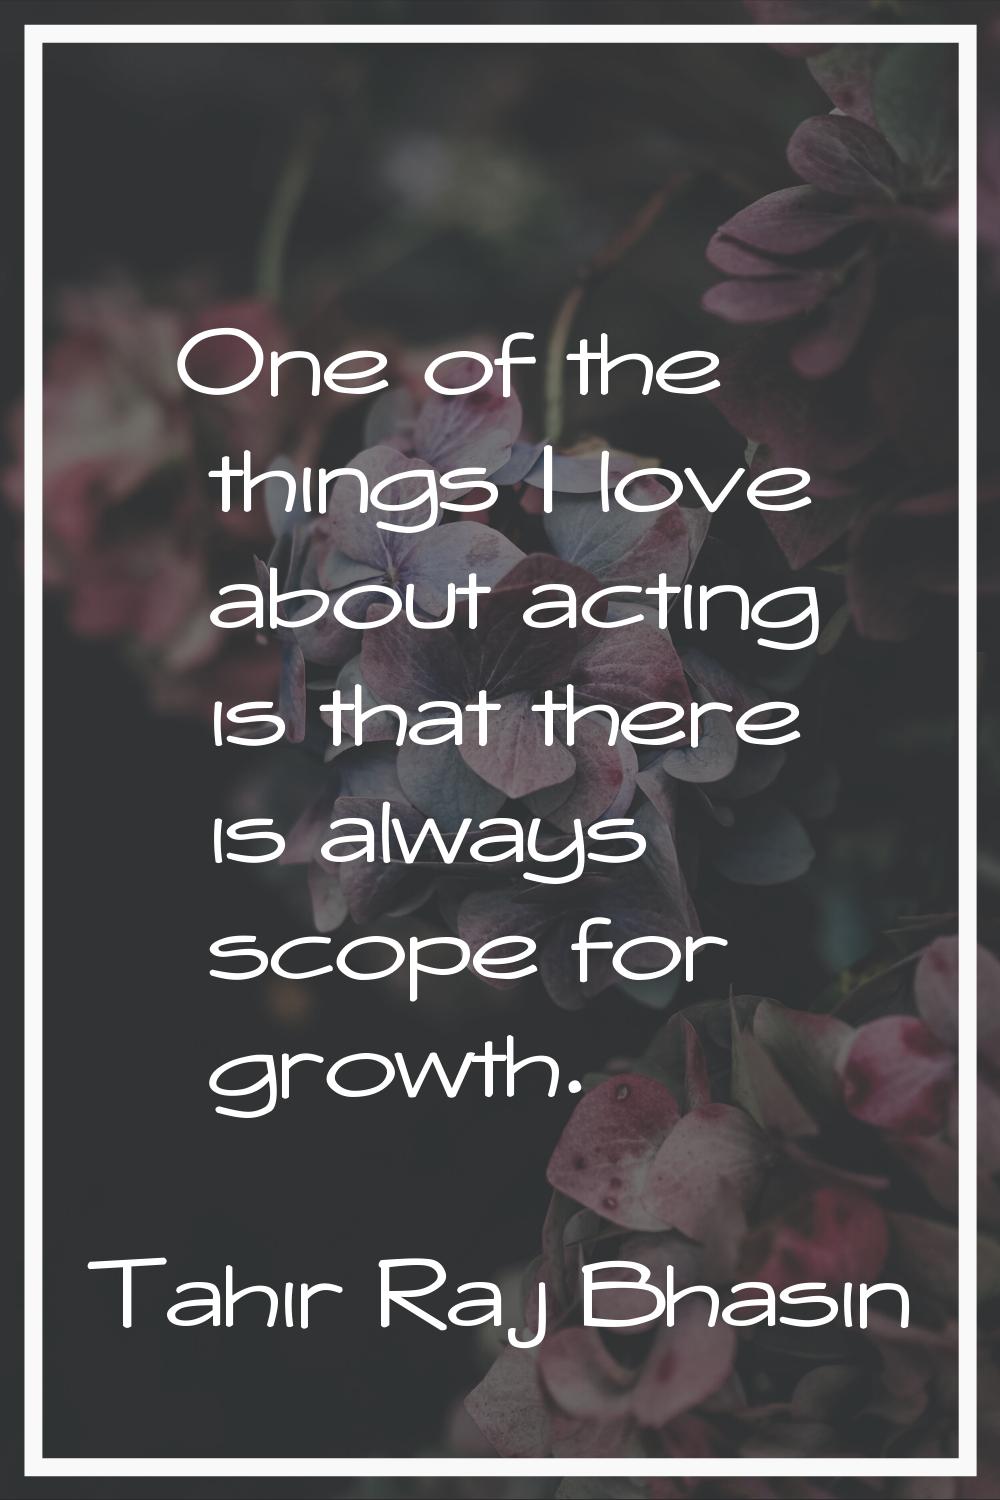 One of the things I love about acting is that there is always scope for growth.